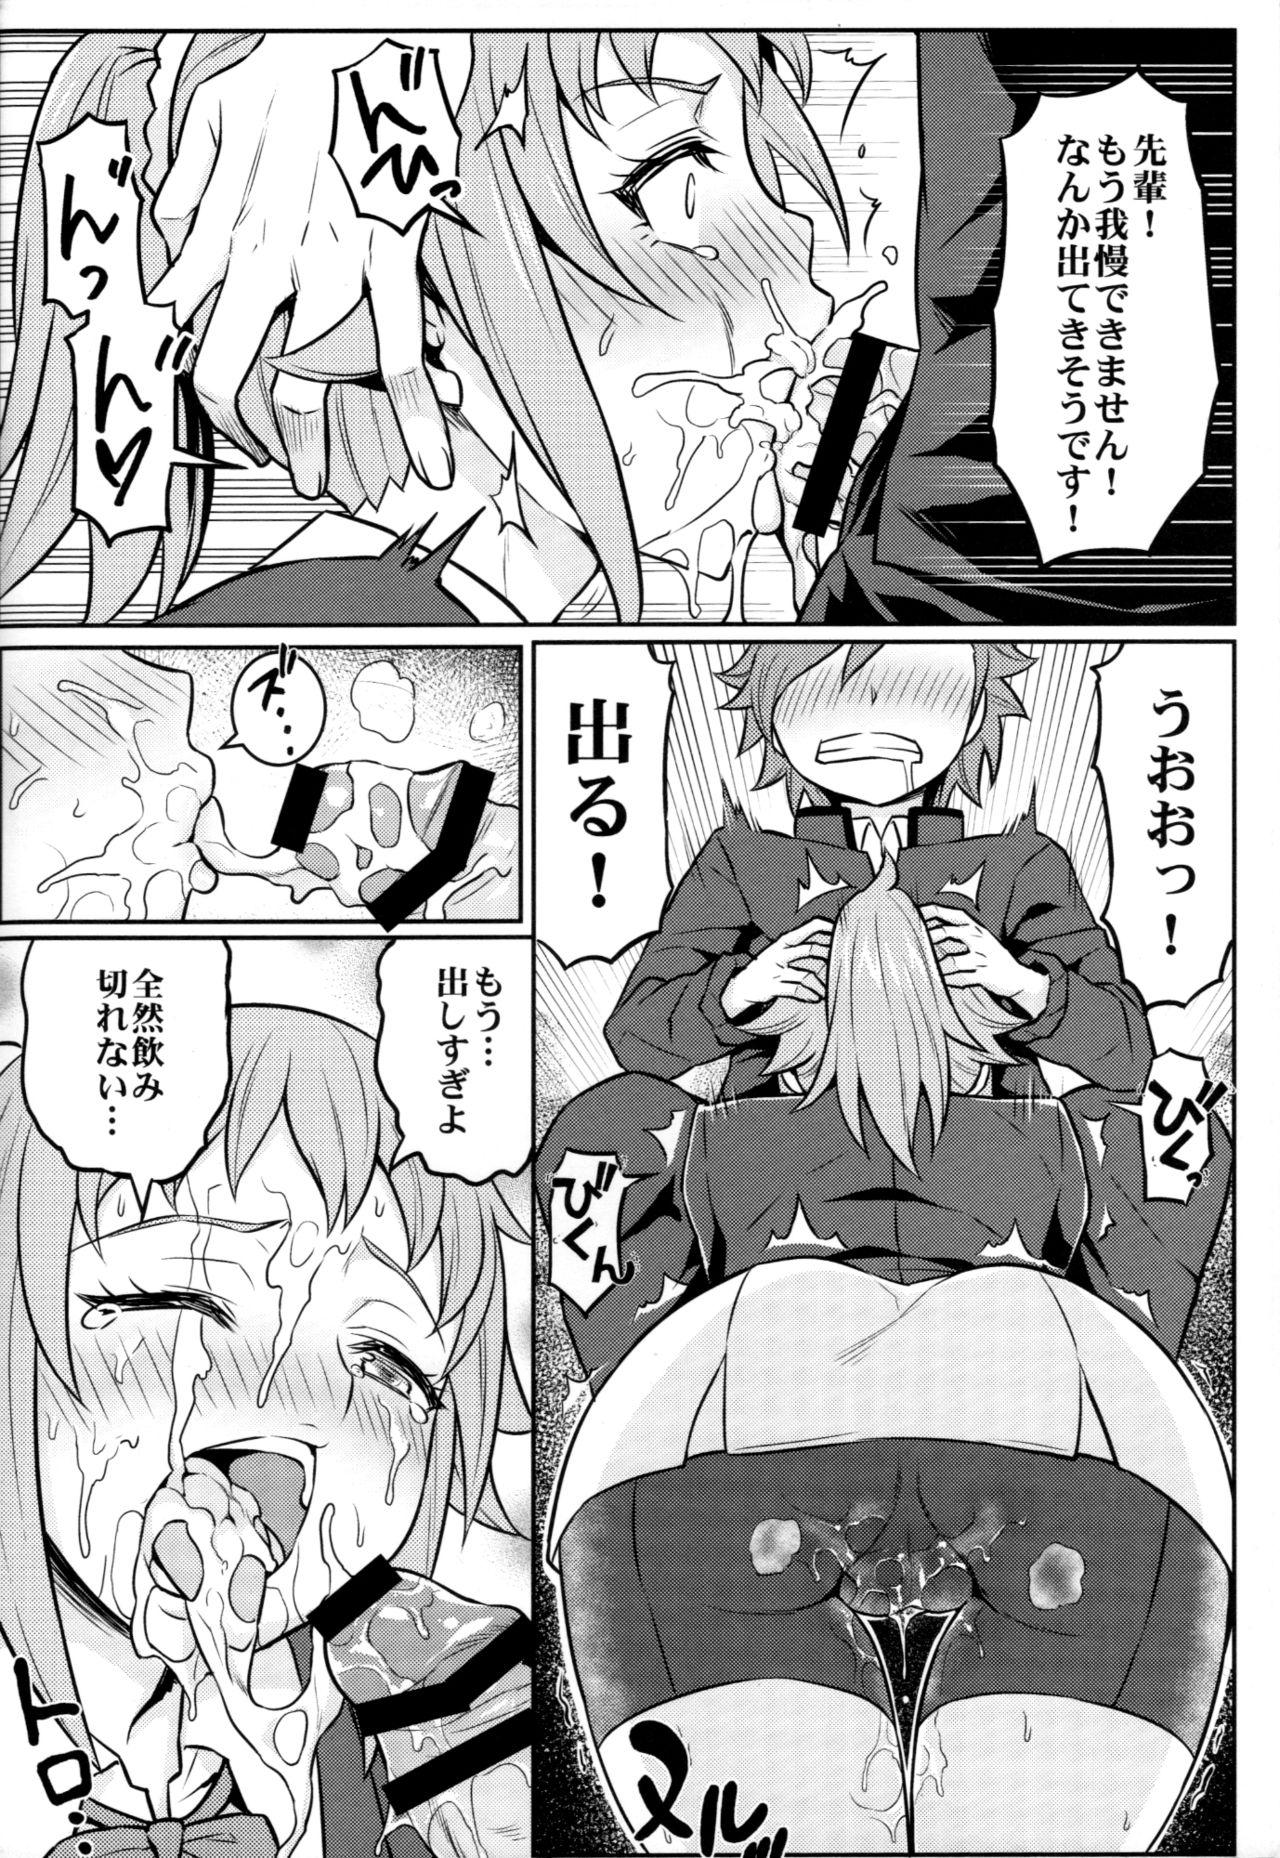 Tit Nayamashii Fighters - Gundam build fighters try Gay Shop - Page 9